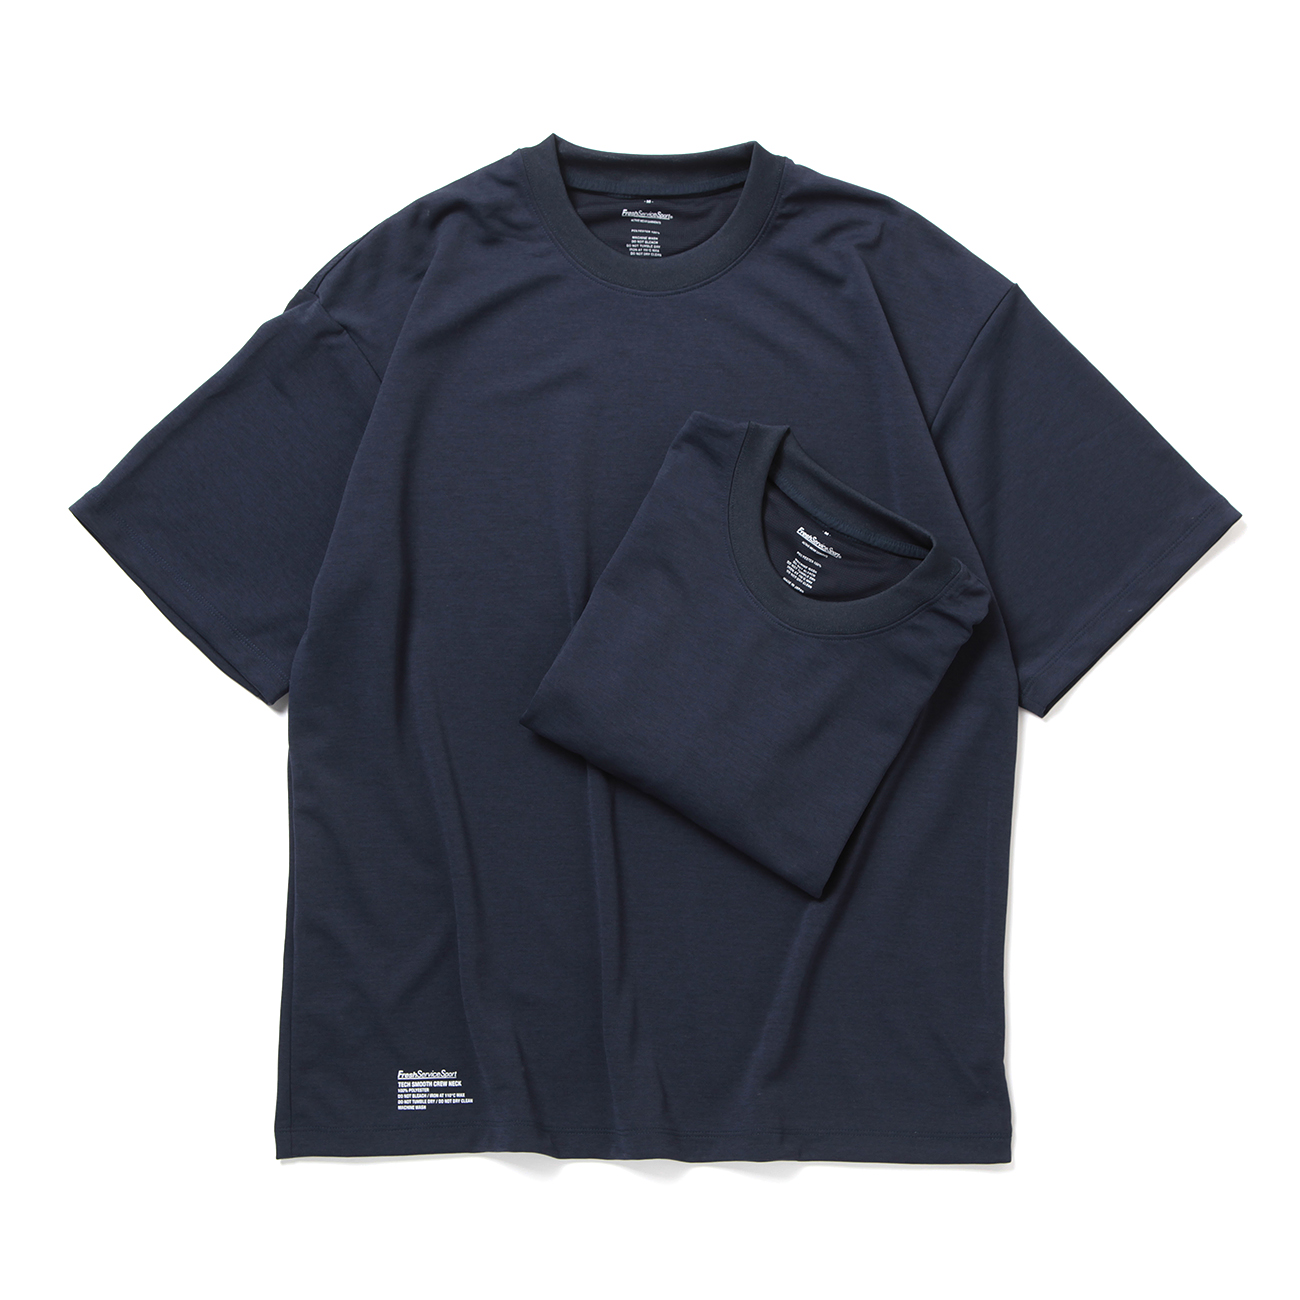 2-PACK TECH SMOOTH CREW NECK - Navy